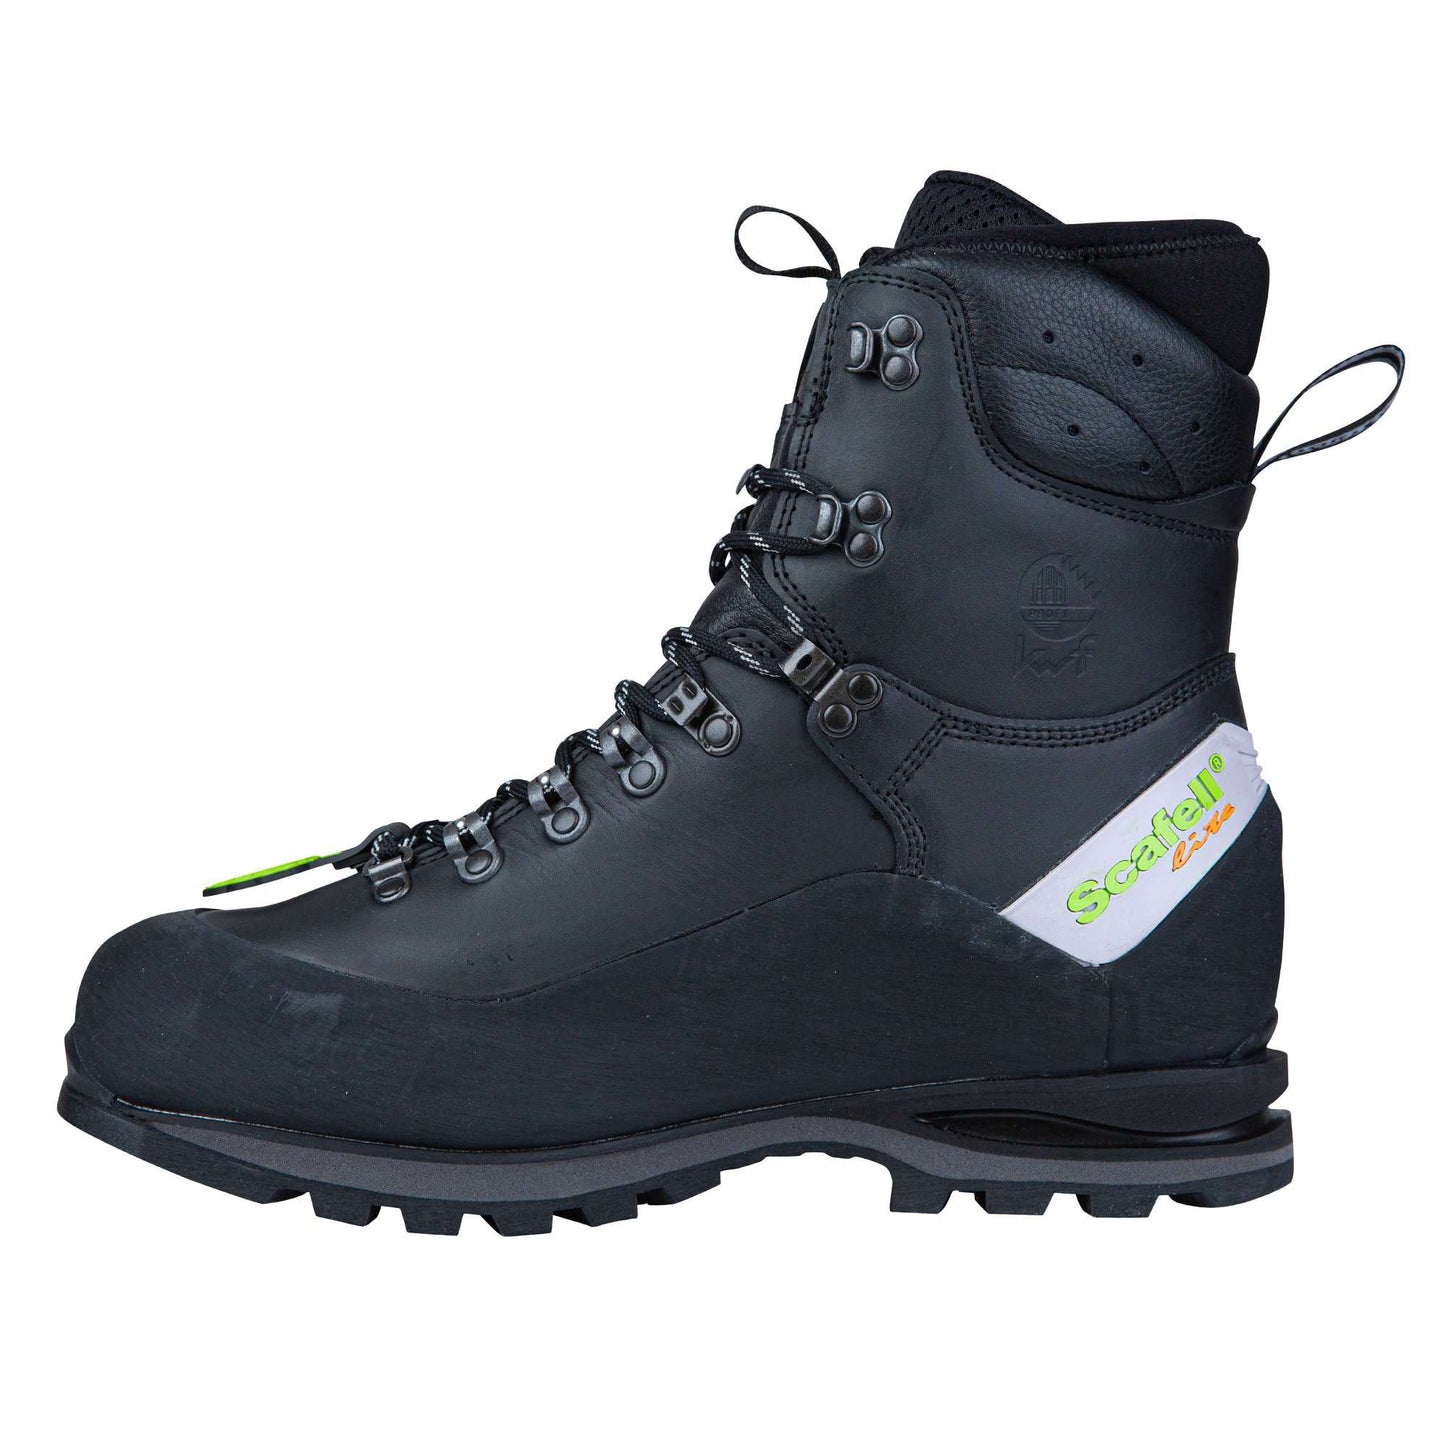 Arbortec AT33100 Scafell Lite Class 2 Chainsaw Boot - Black